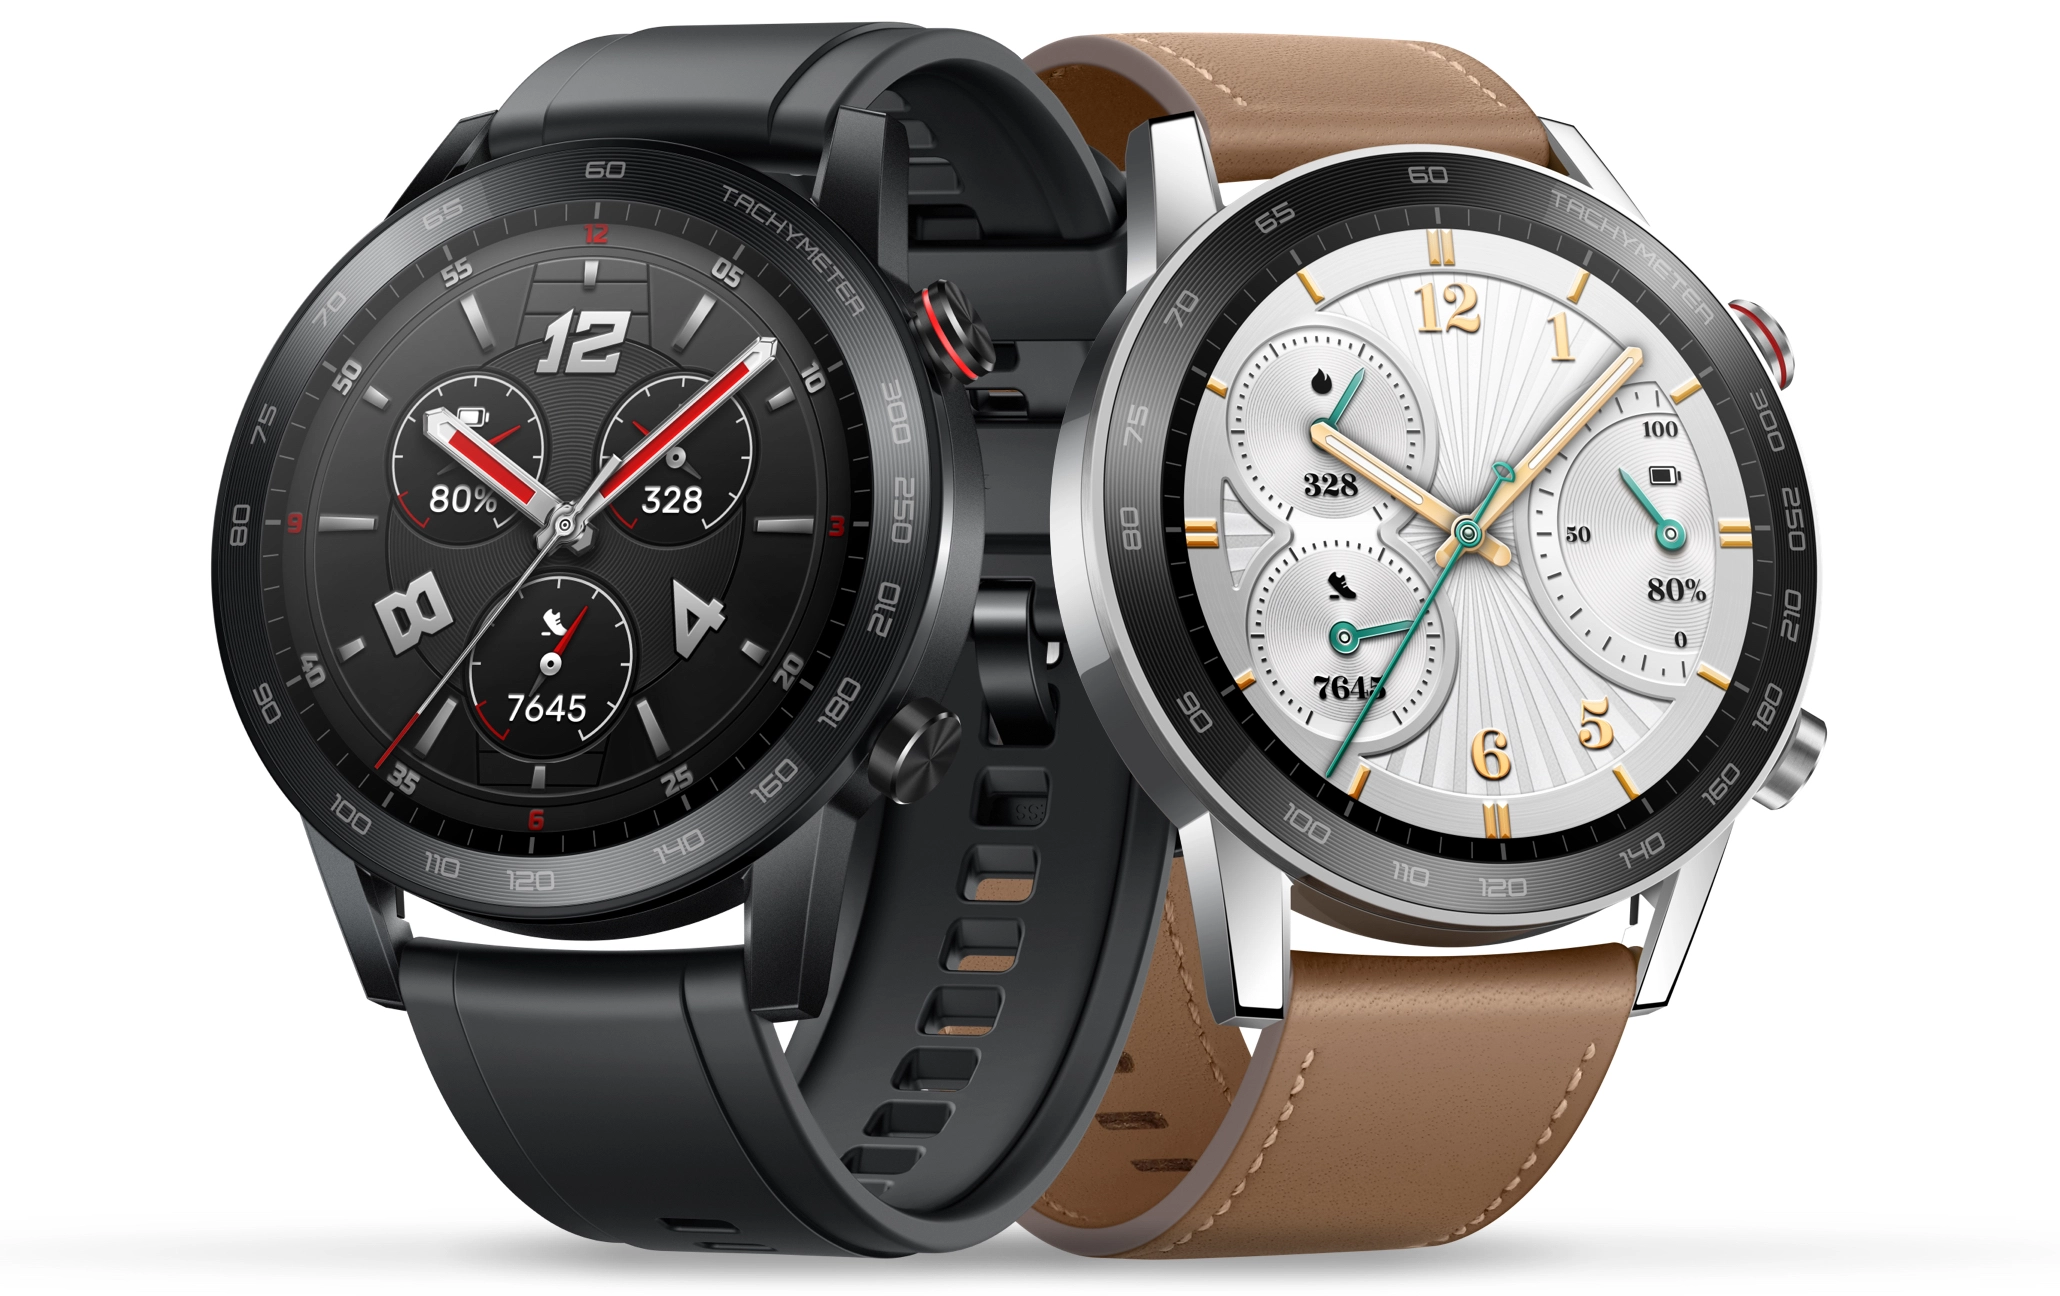 Buy HONOR Watch GS 3, Price & Offer